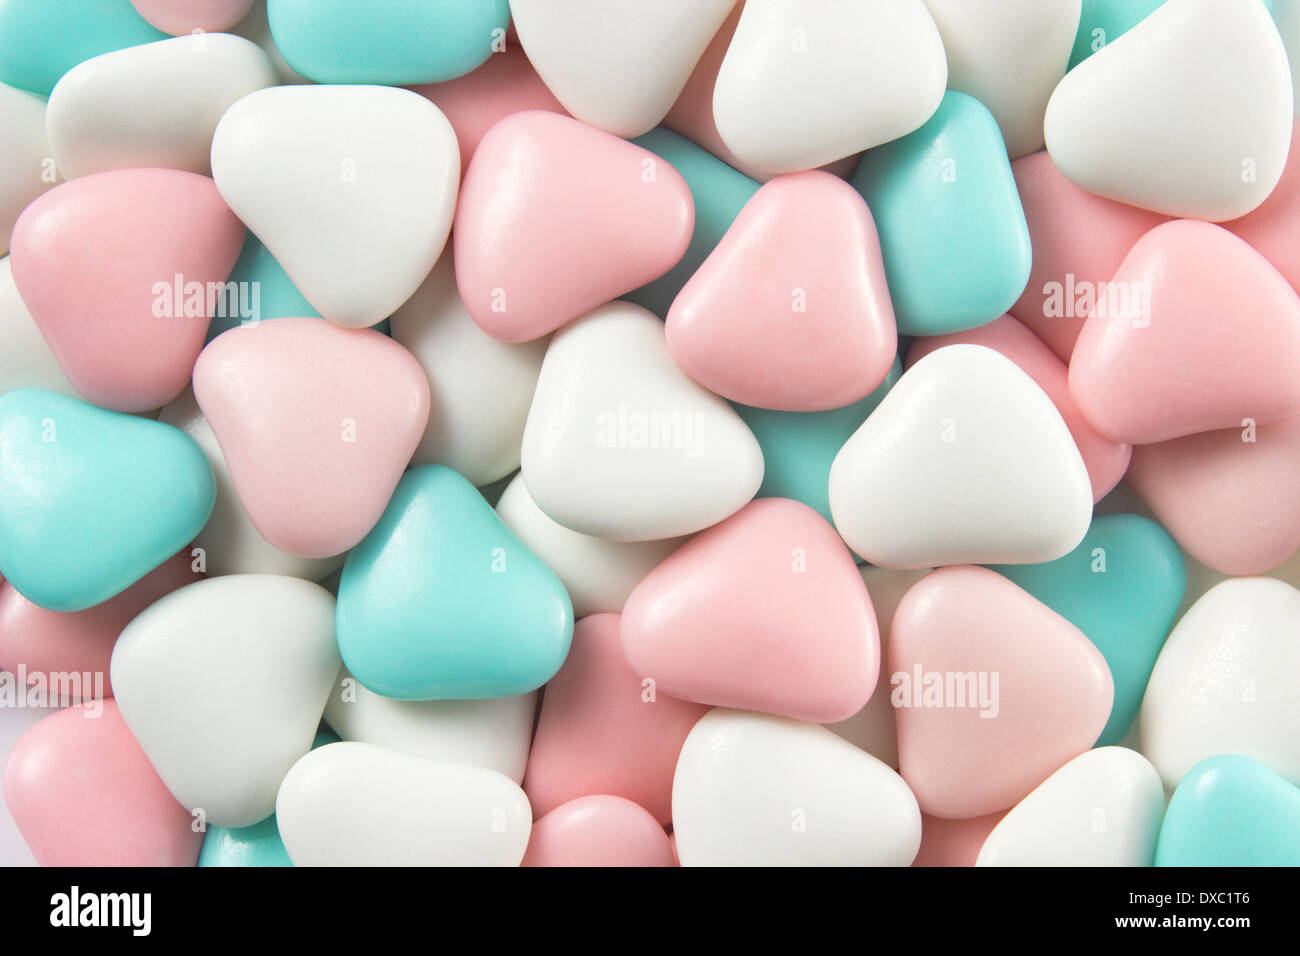 abstract background with colorful sweets Stock Photo